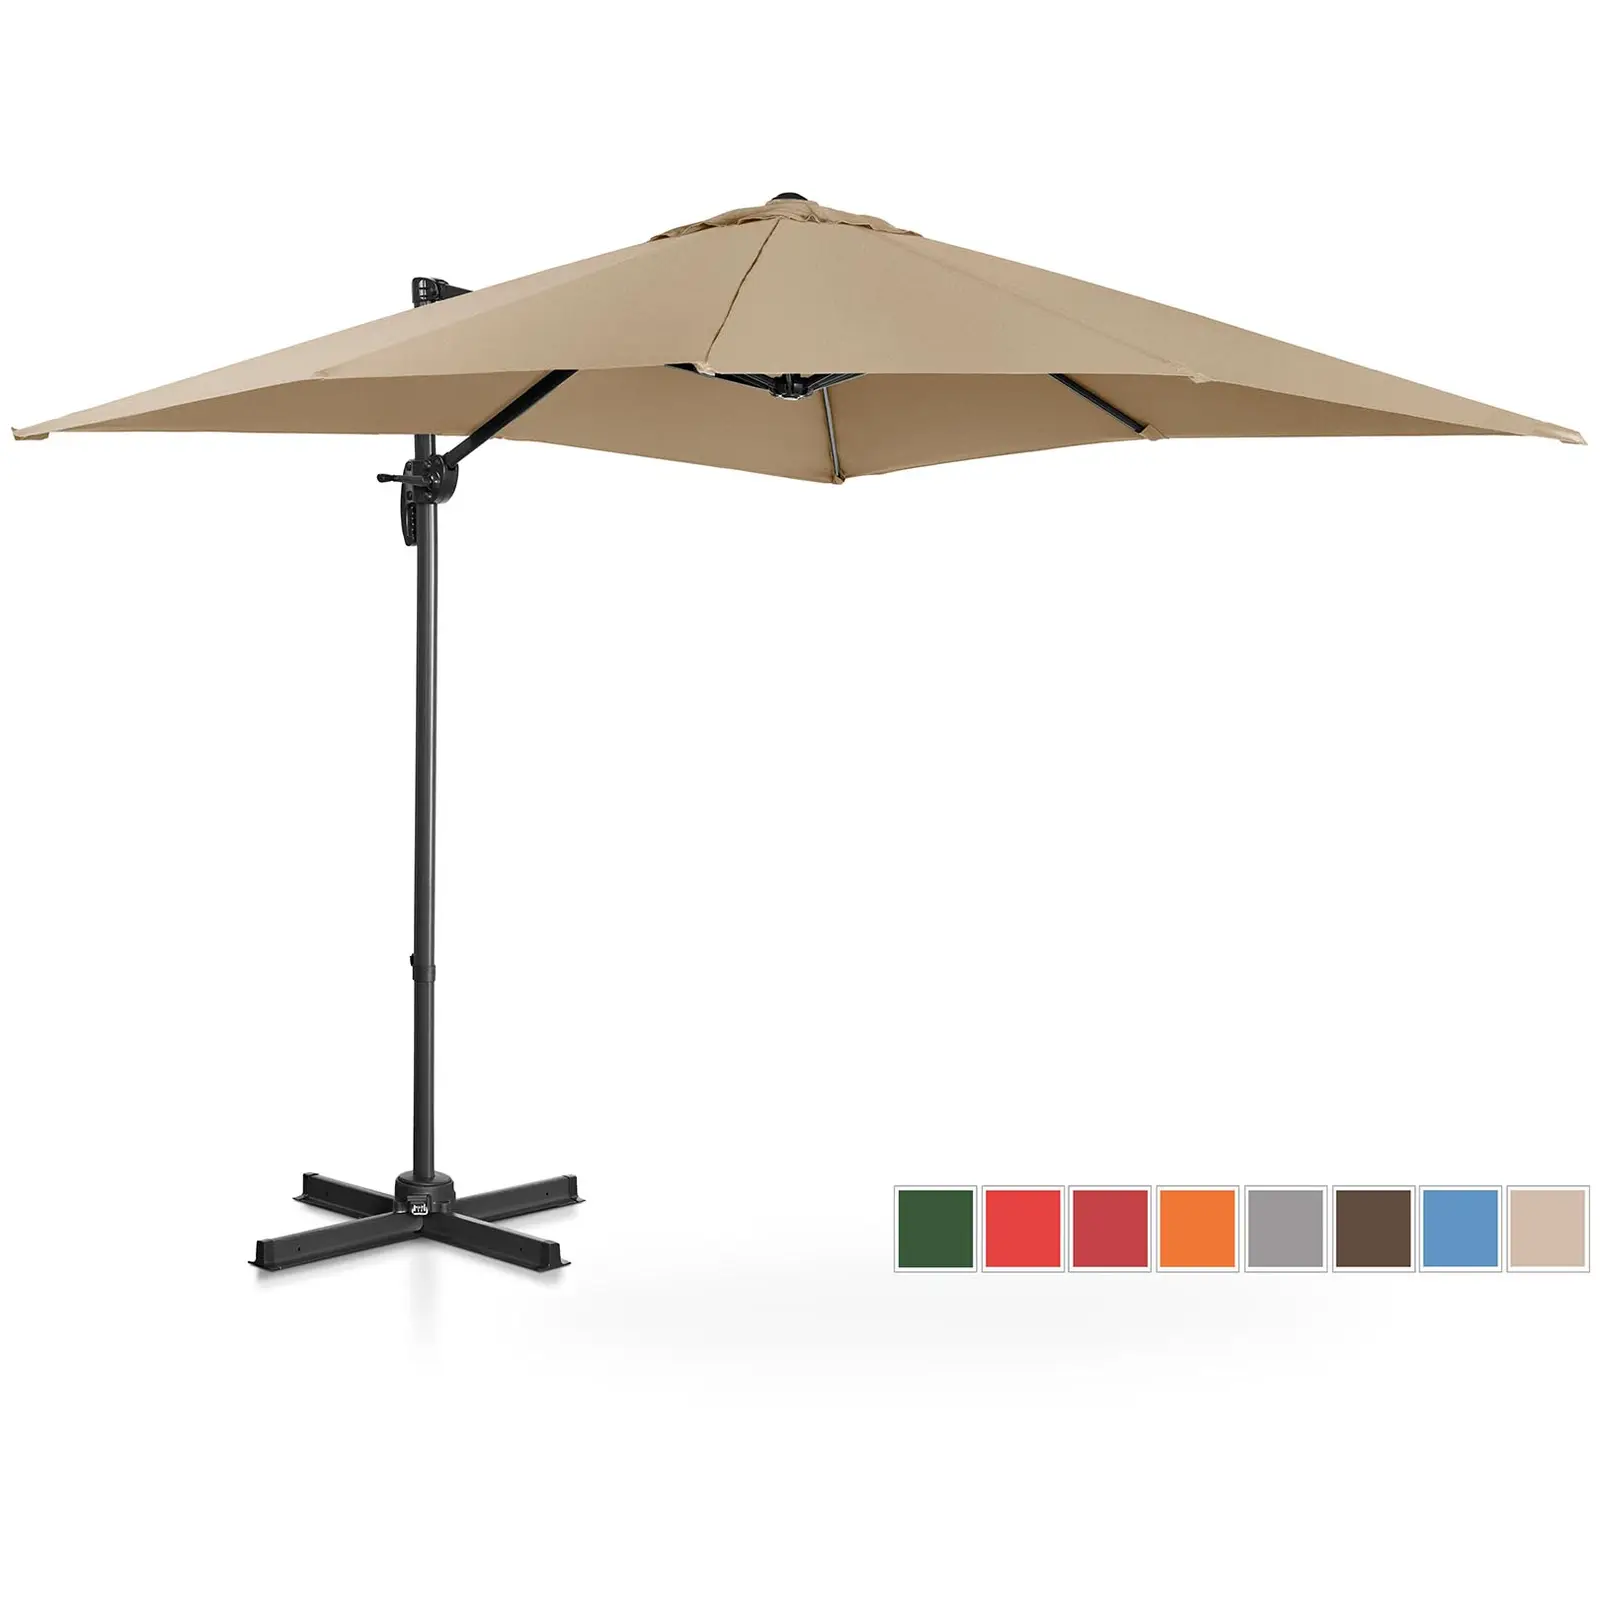 Garden umbrella - taupe - square - 250 x 250 cm - tiltable and rotatable